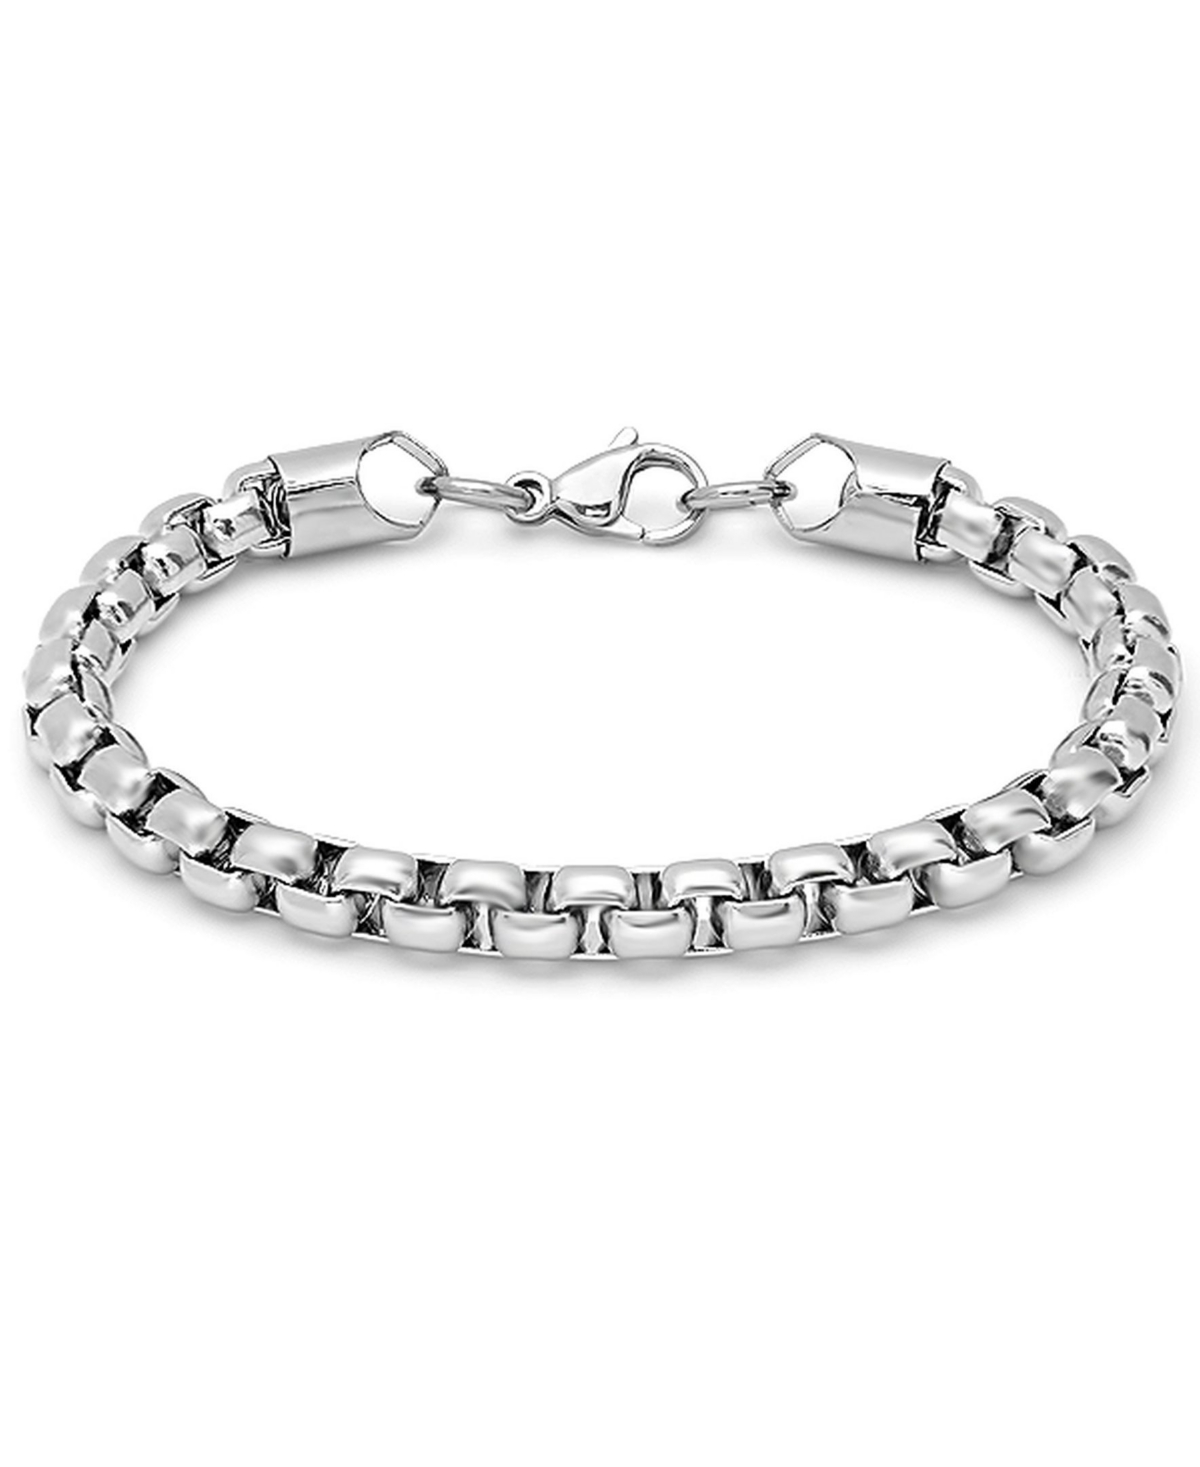 Men's Stainless Steel Thick Round Box Link Bracelet - Silver